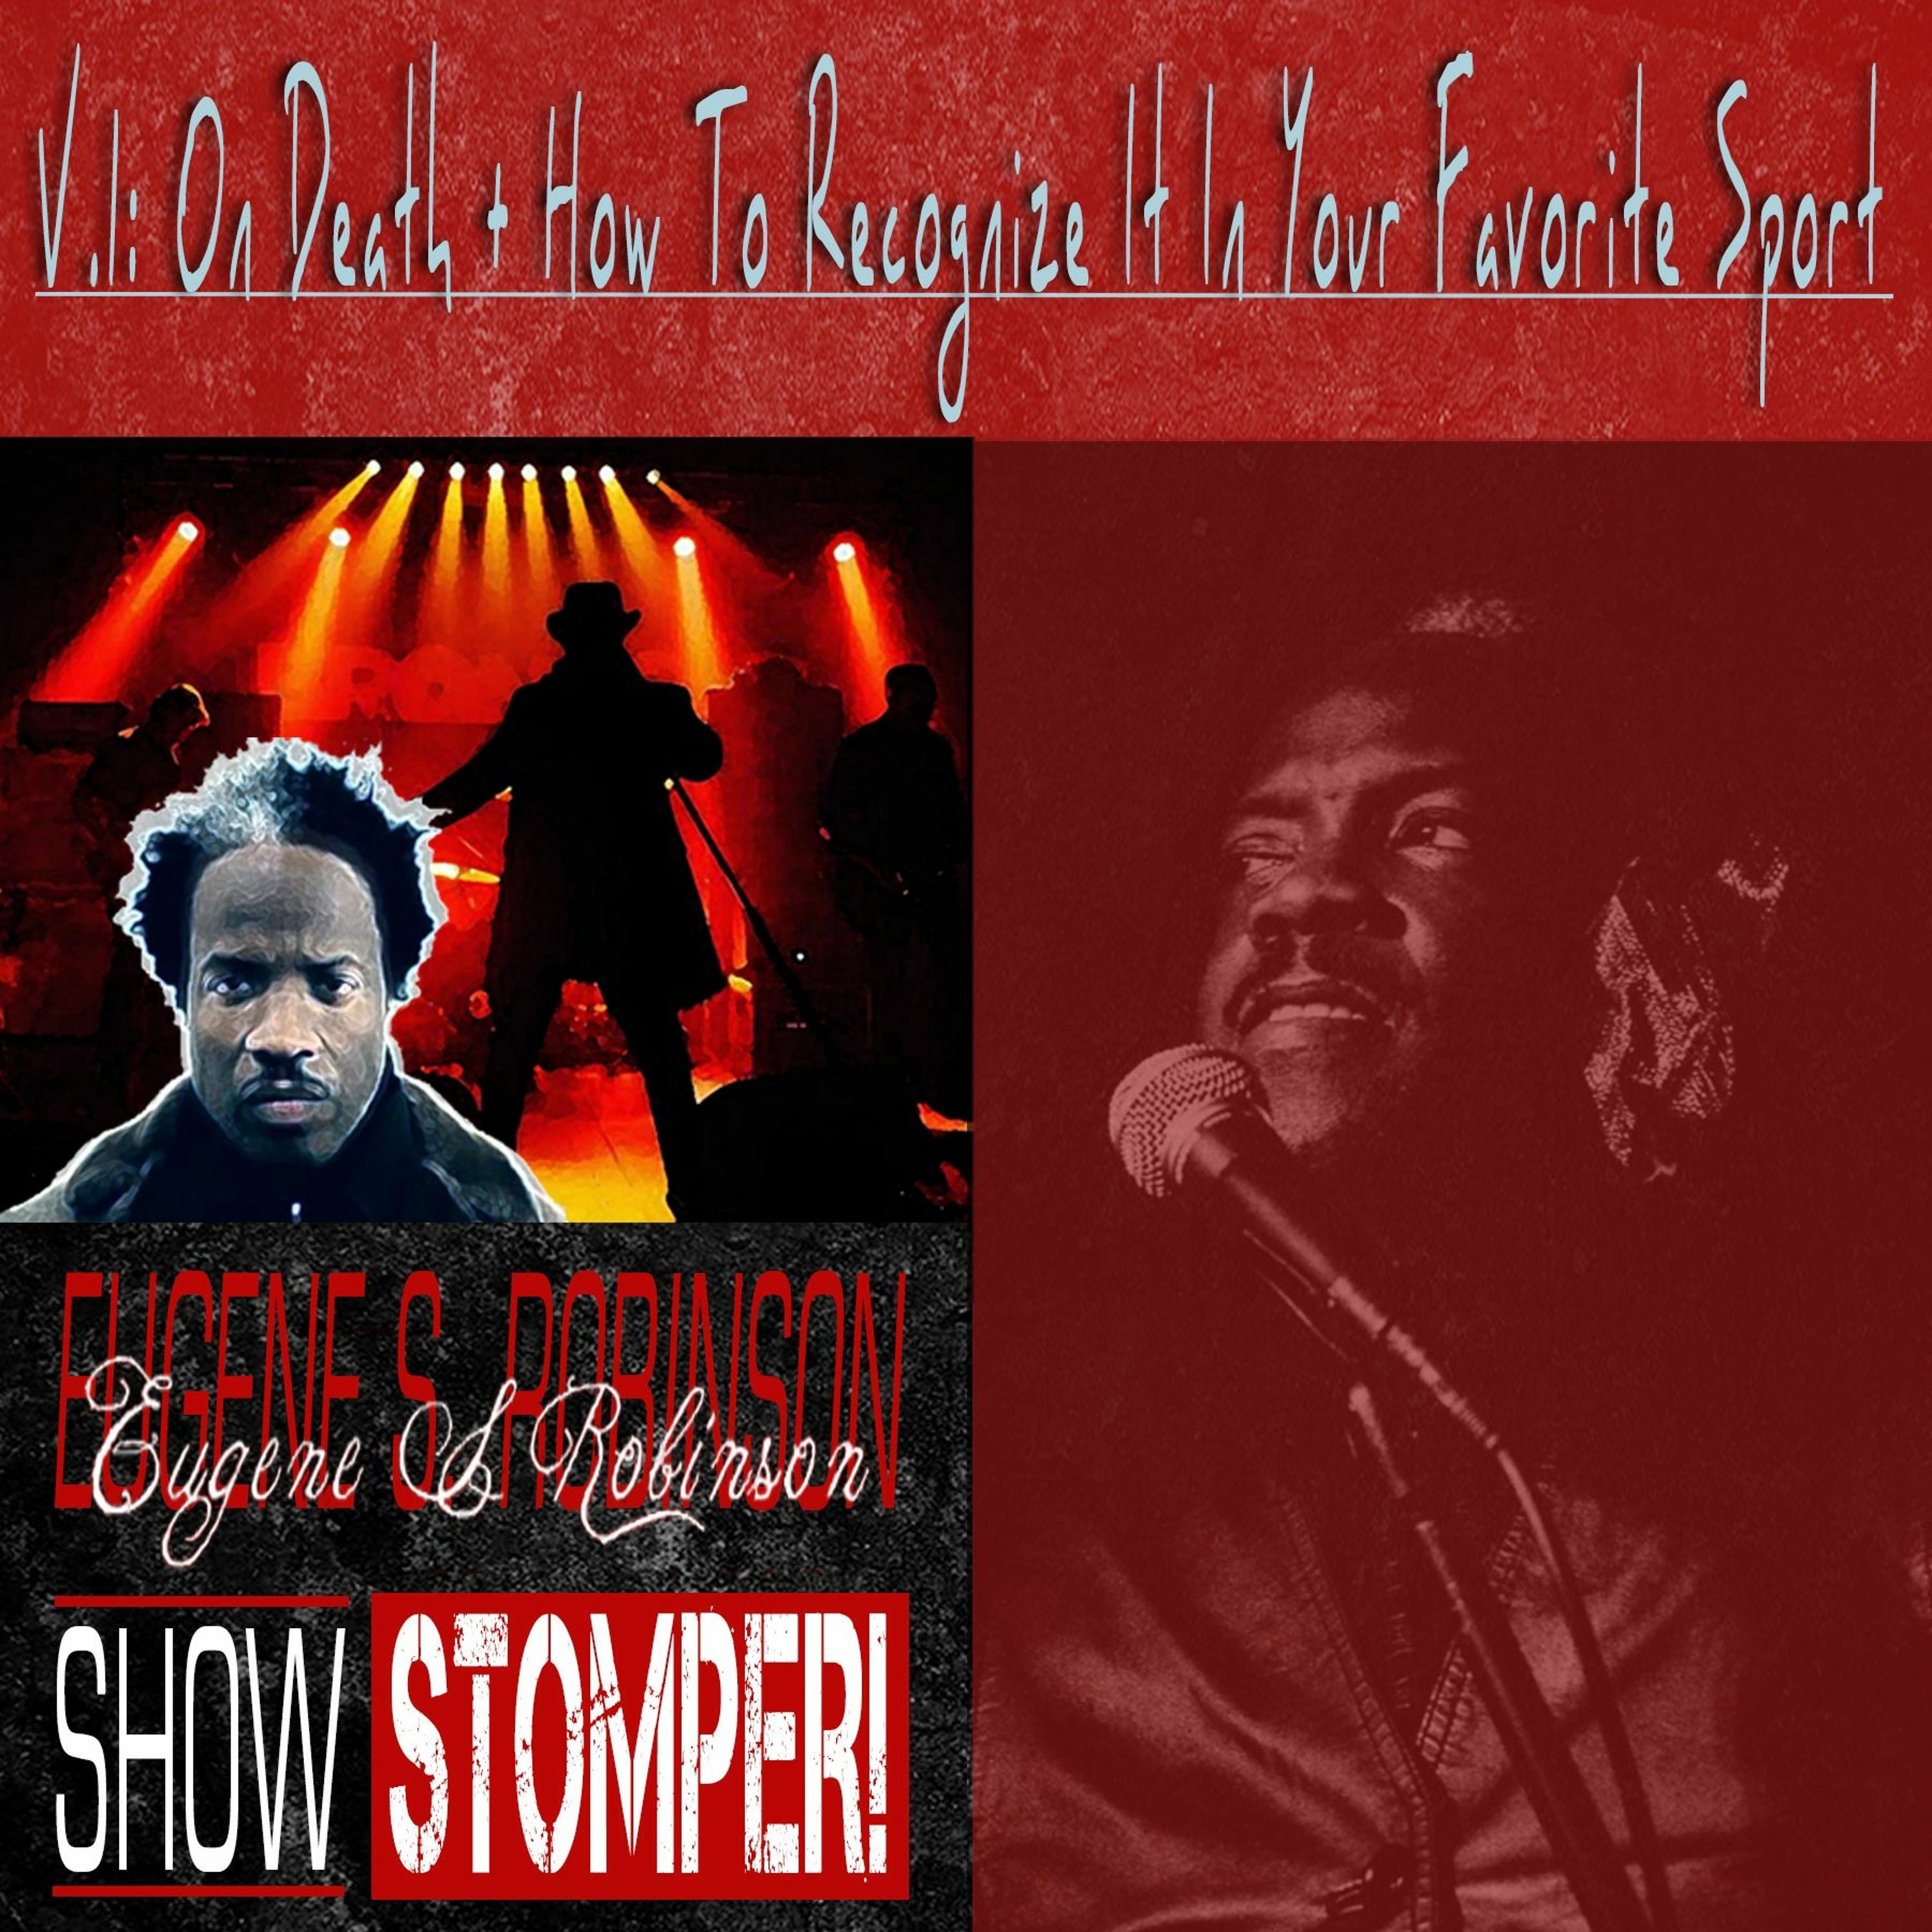 The Eugene S. Robinson Show Stomper! - V.1: On Death + How To Recognize It In Your Favorite Sport